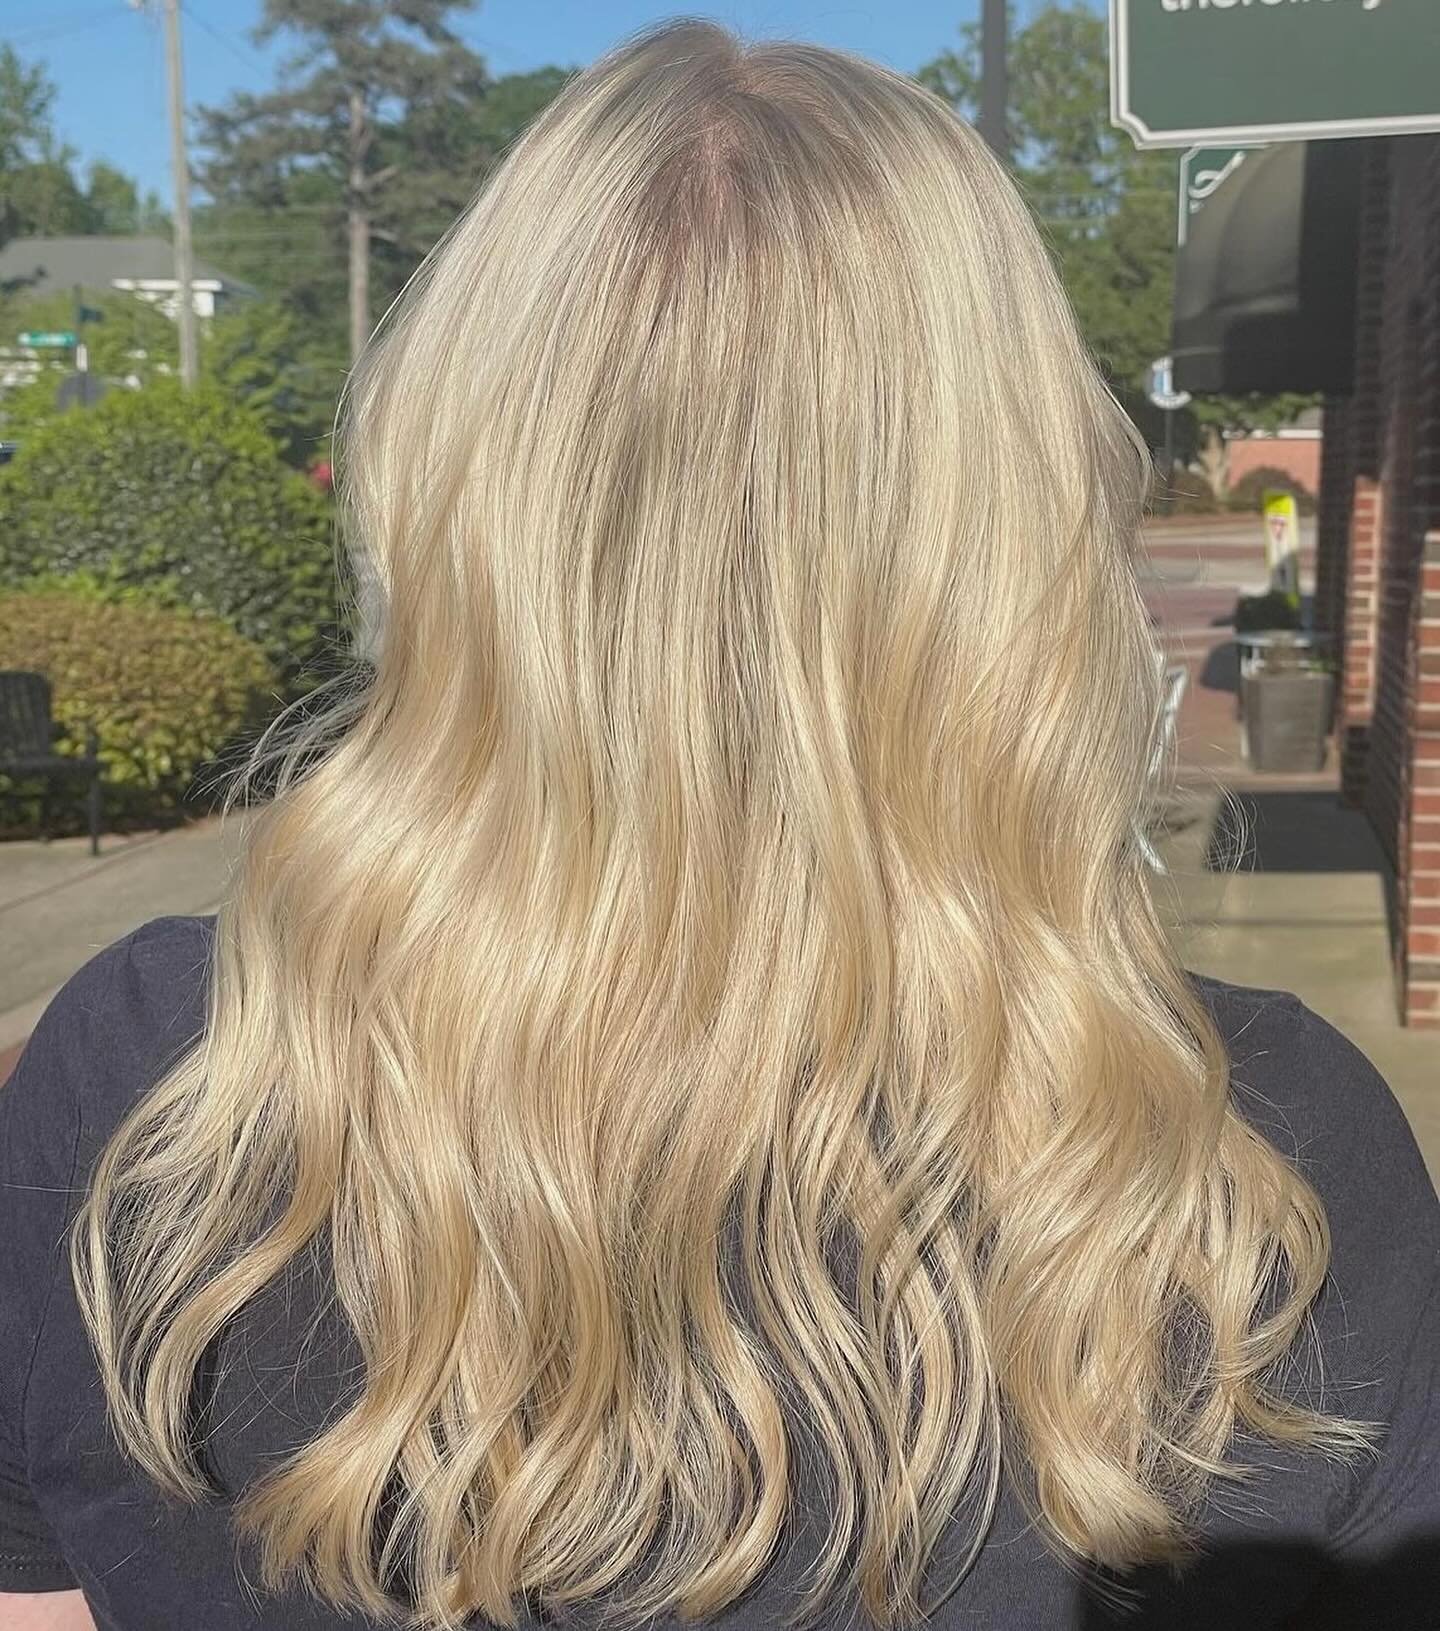 ✨Such a stunning transformation when the new growth is done.  Kiley @hairbykileycleveland created a beautiful sunny blonde on this beauty. 
(Swipe for before)
.
.
#thefoilery #blonde #blondehair #roottouchup #fullfoilhighlight #nchairsalon #hollyspri